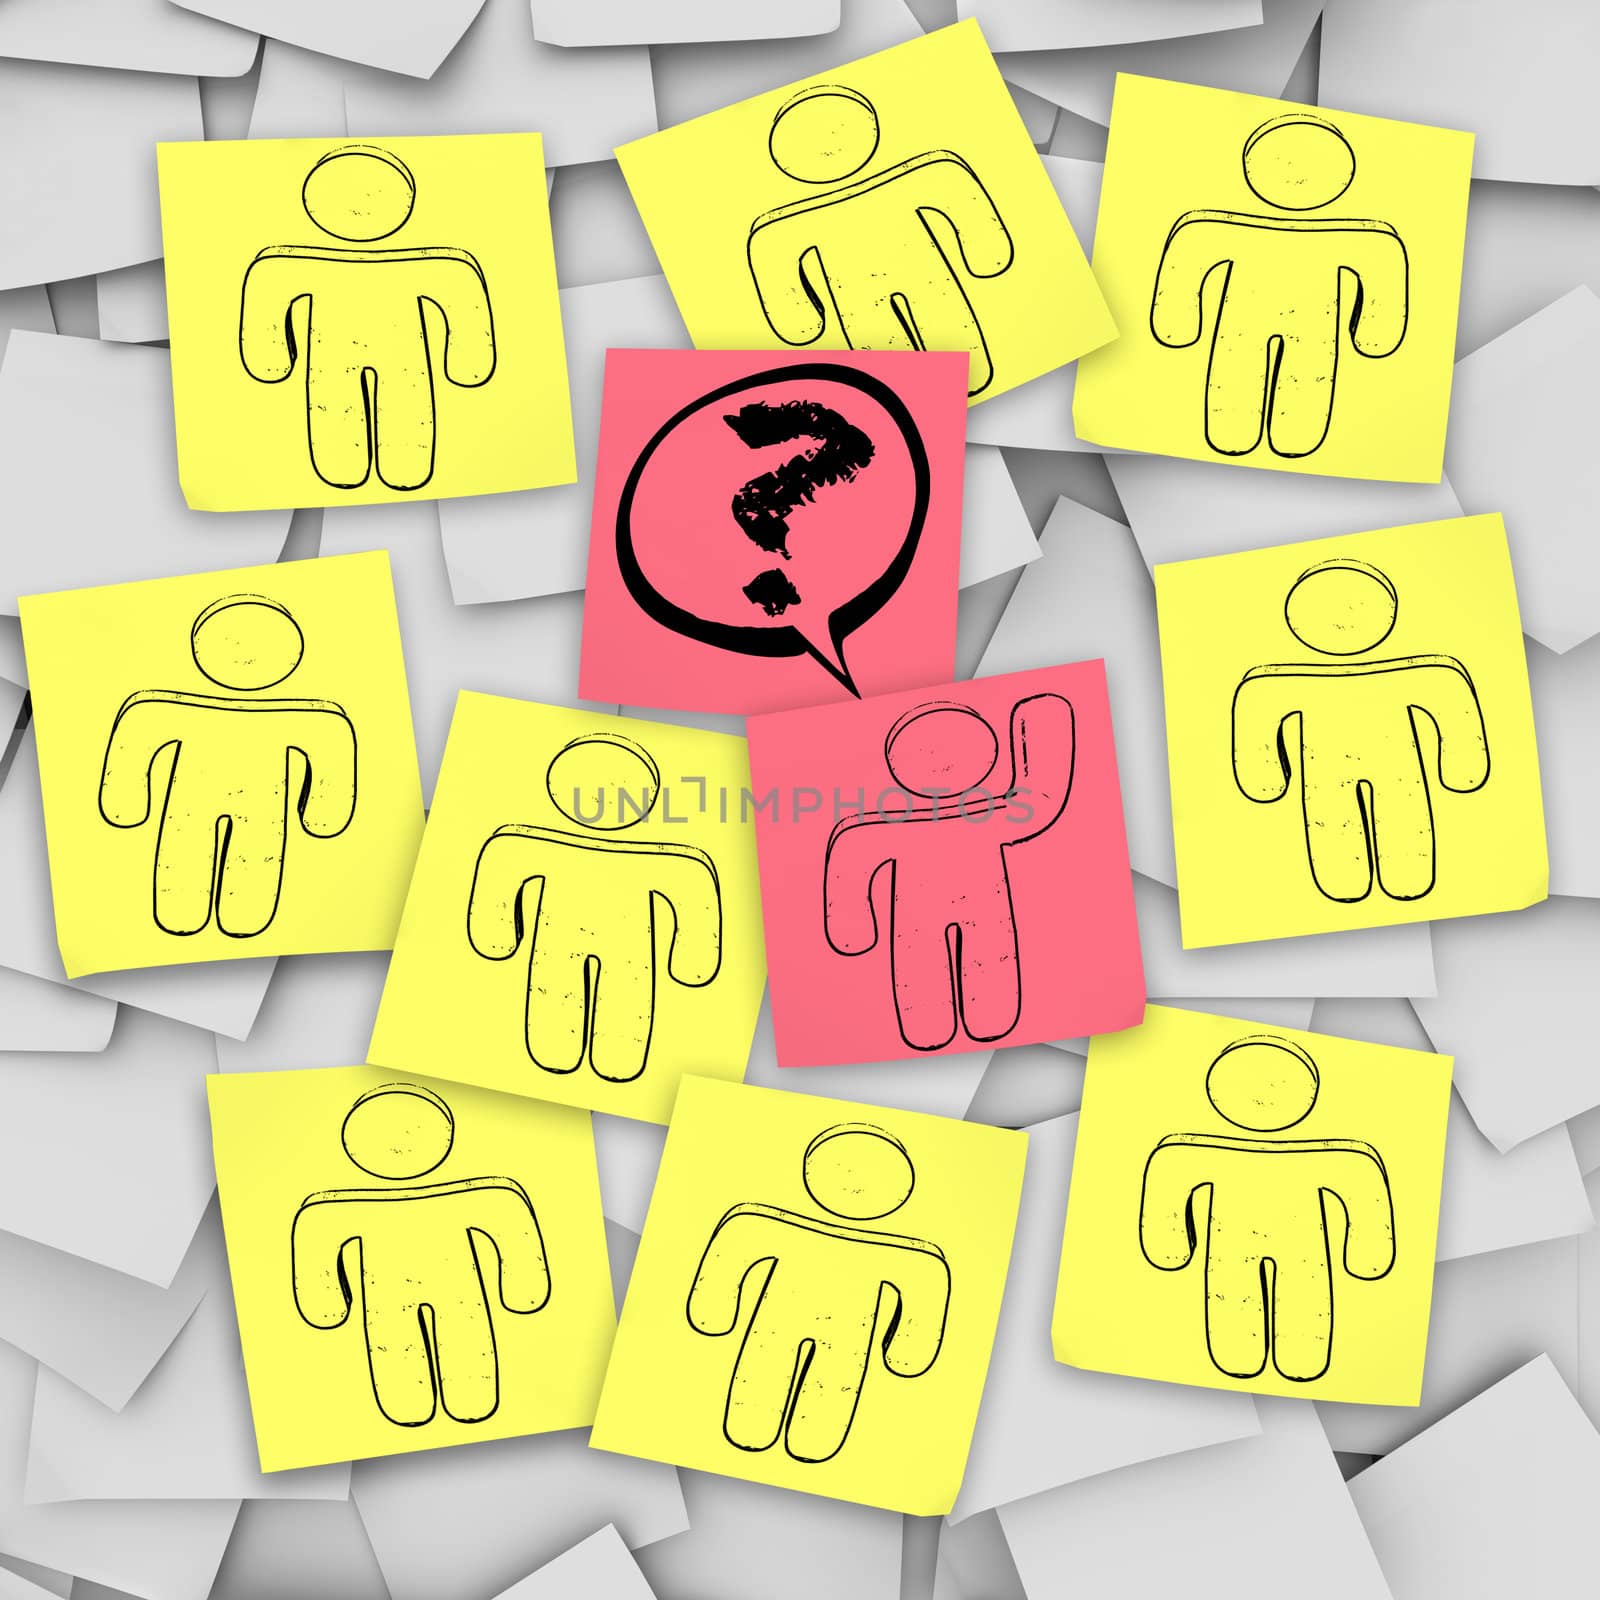 One Person Raises Hand for Question - Sticky Notes by iQoncept